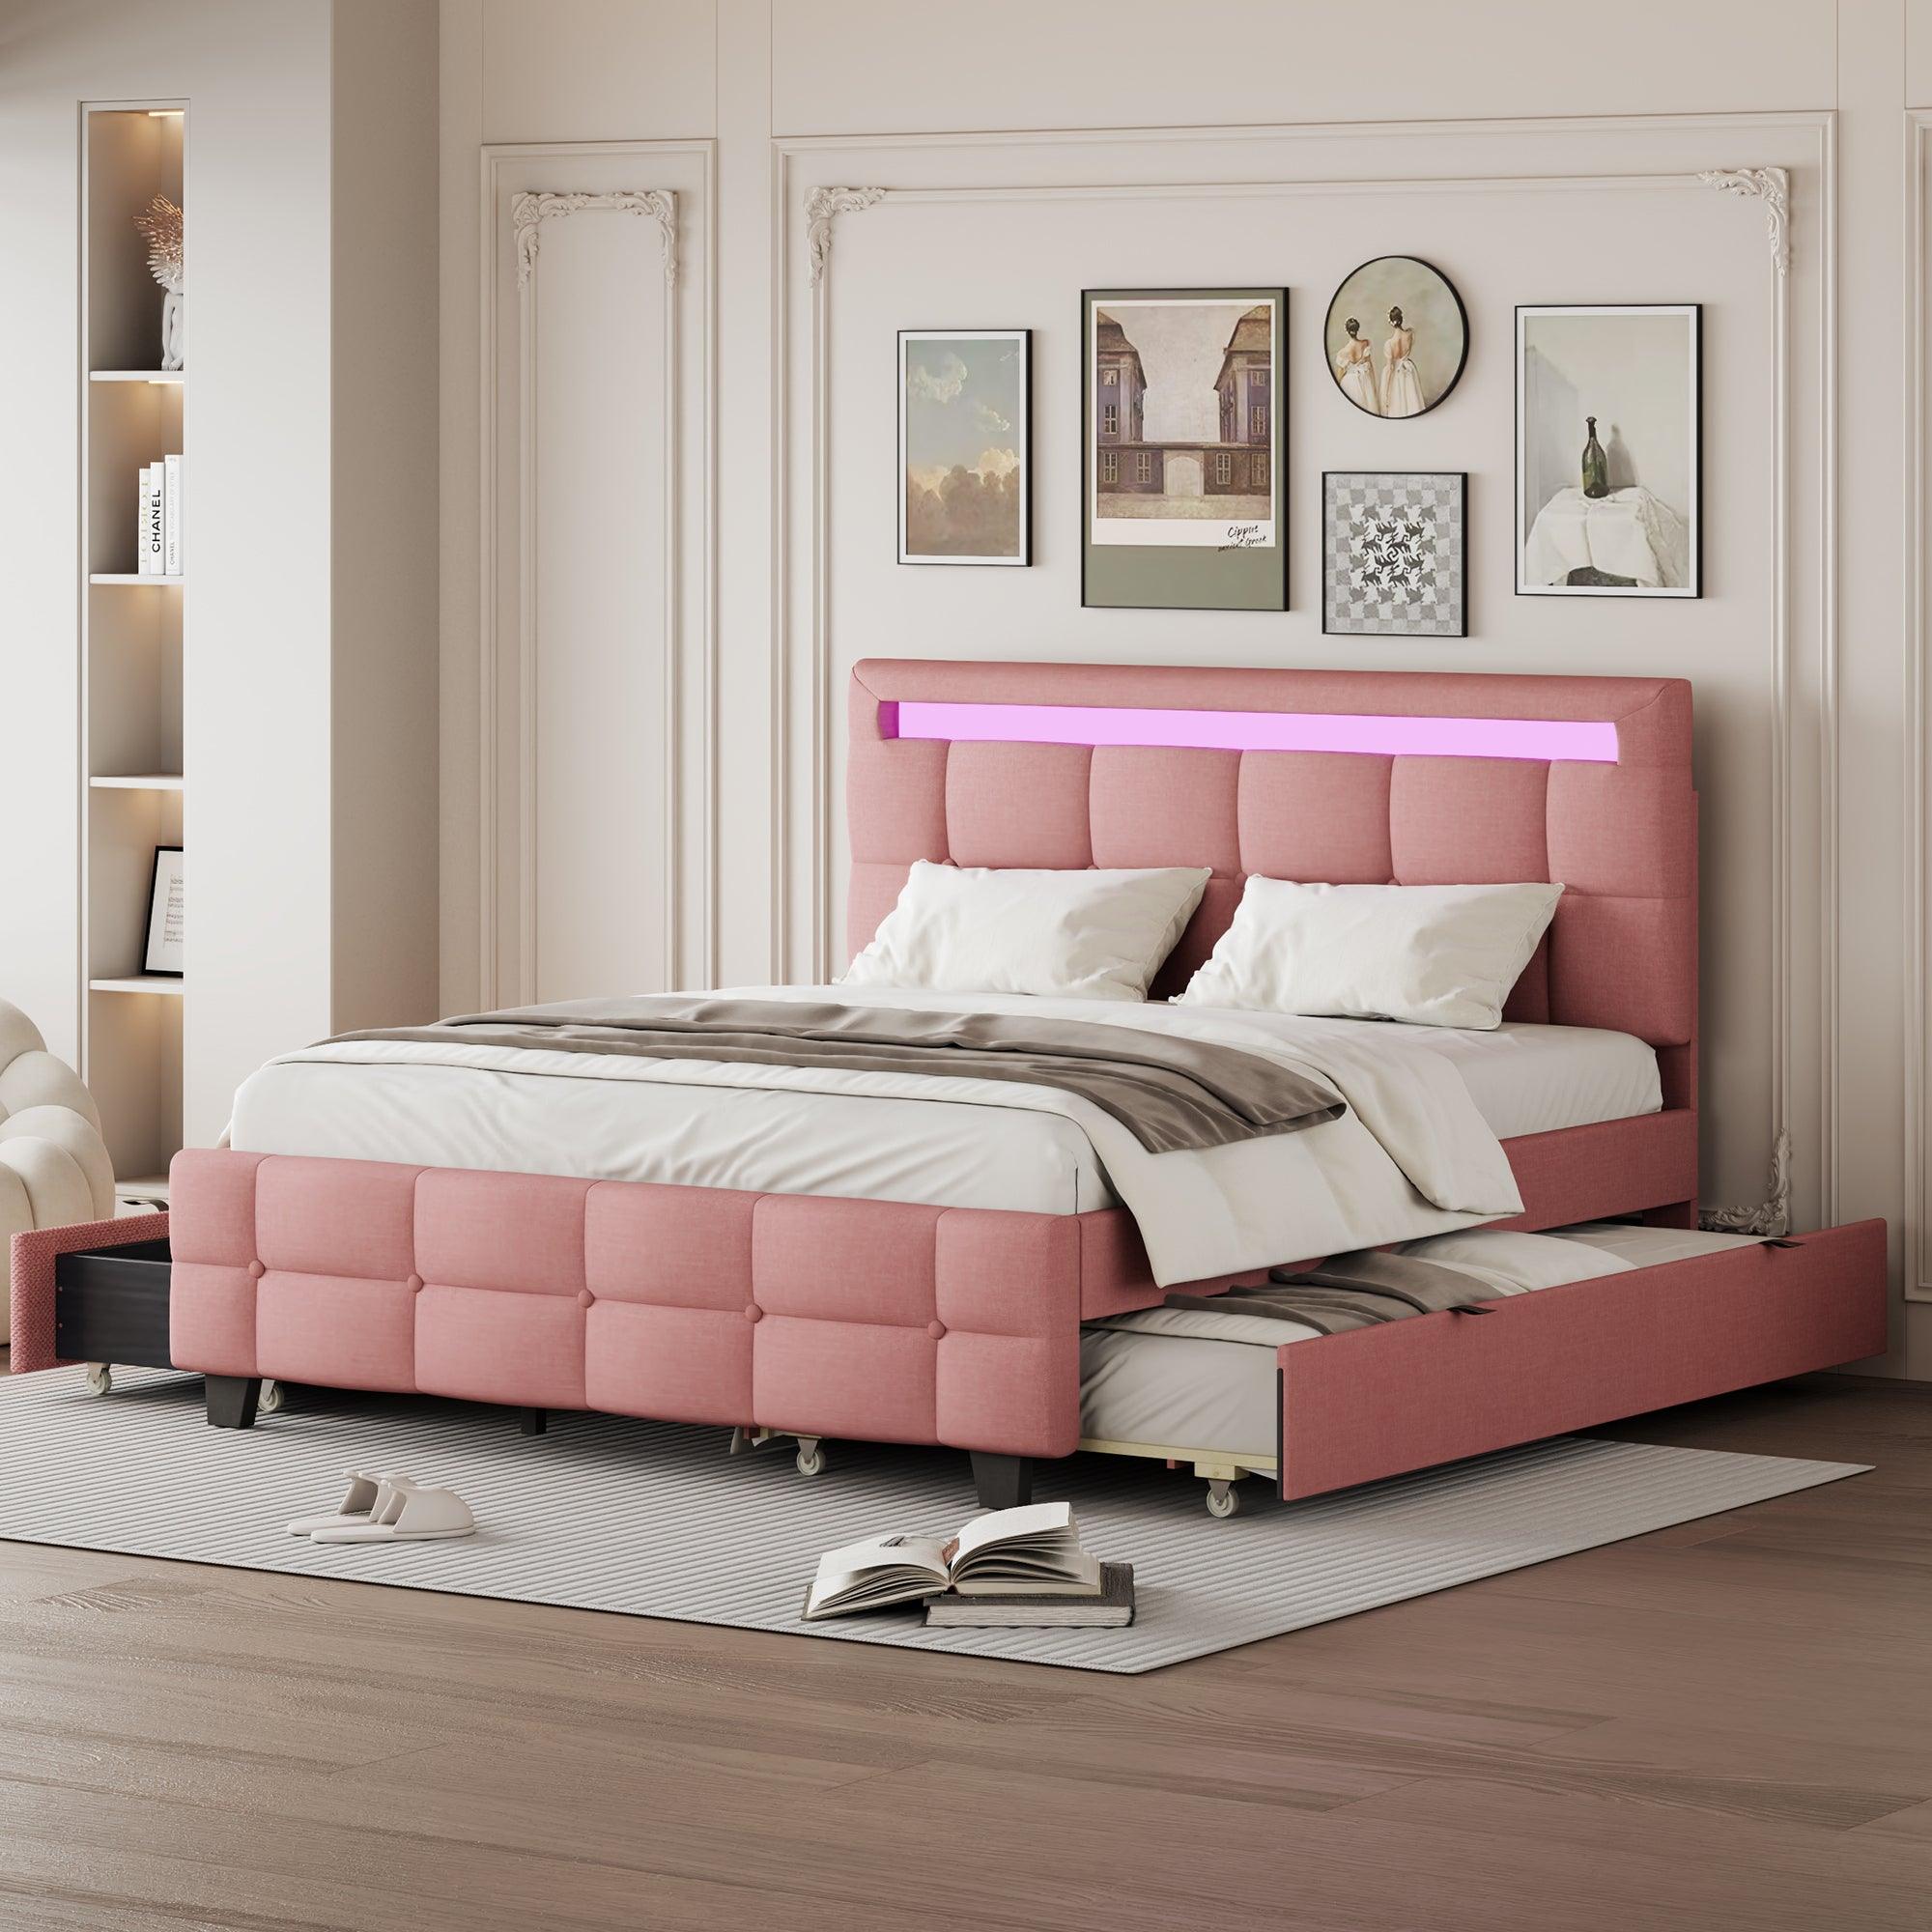 🆓🚛 Queen Size Upholstered Platform Bed With Led Frame, With Twin Xl Size Trundle & 2 Drawers, Linen Fabric, Pink